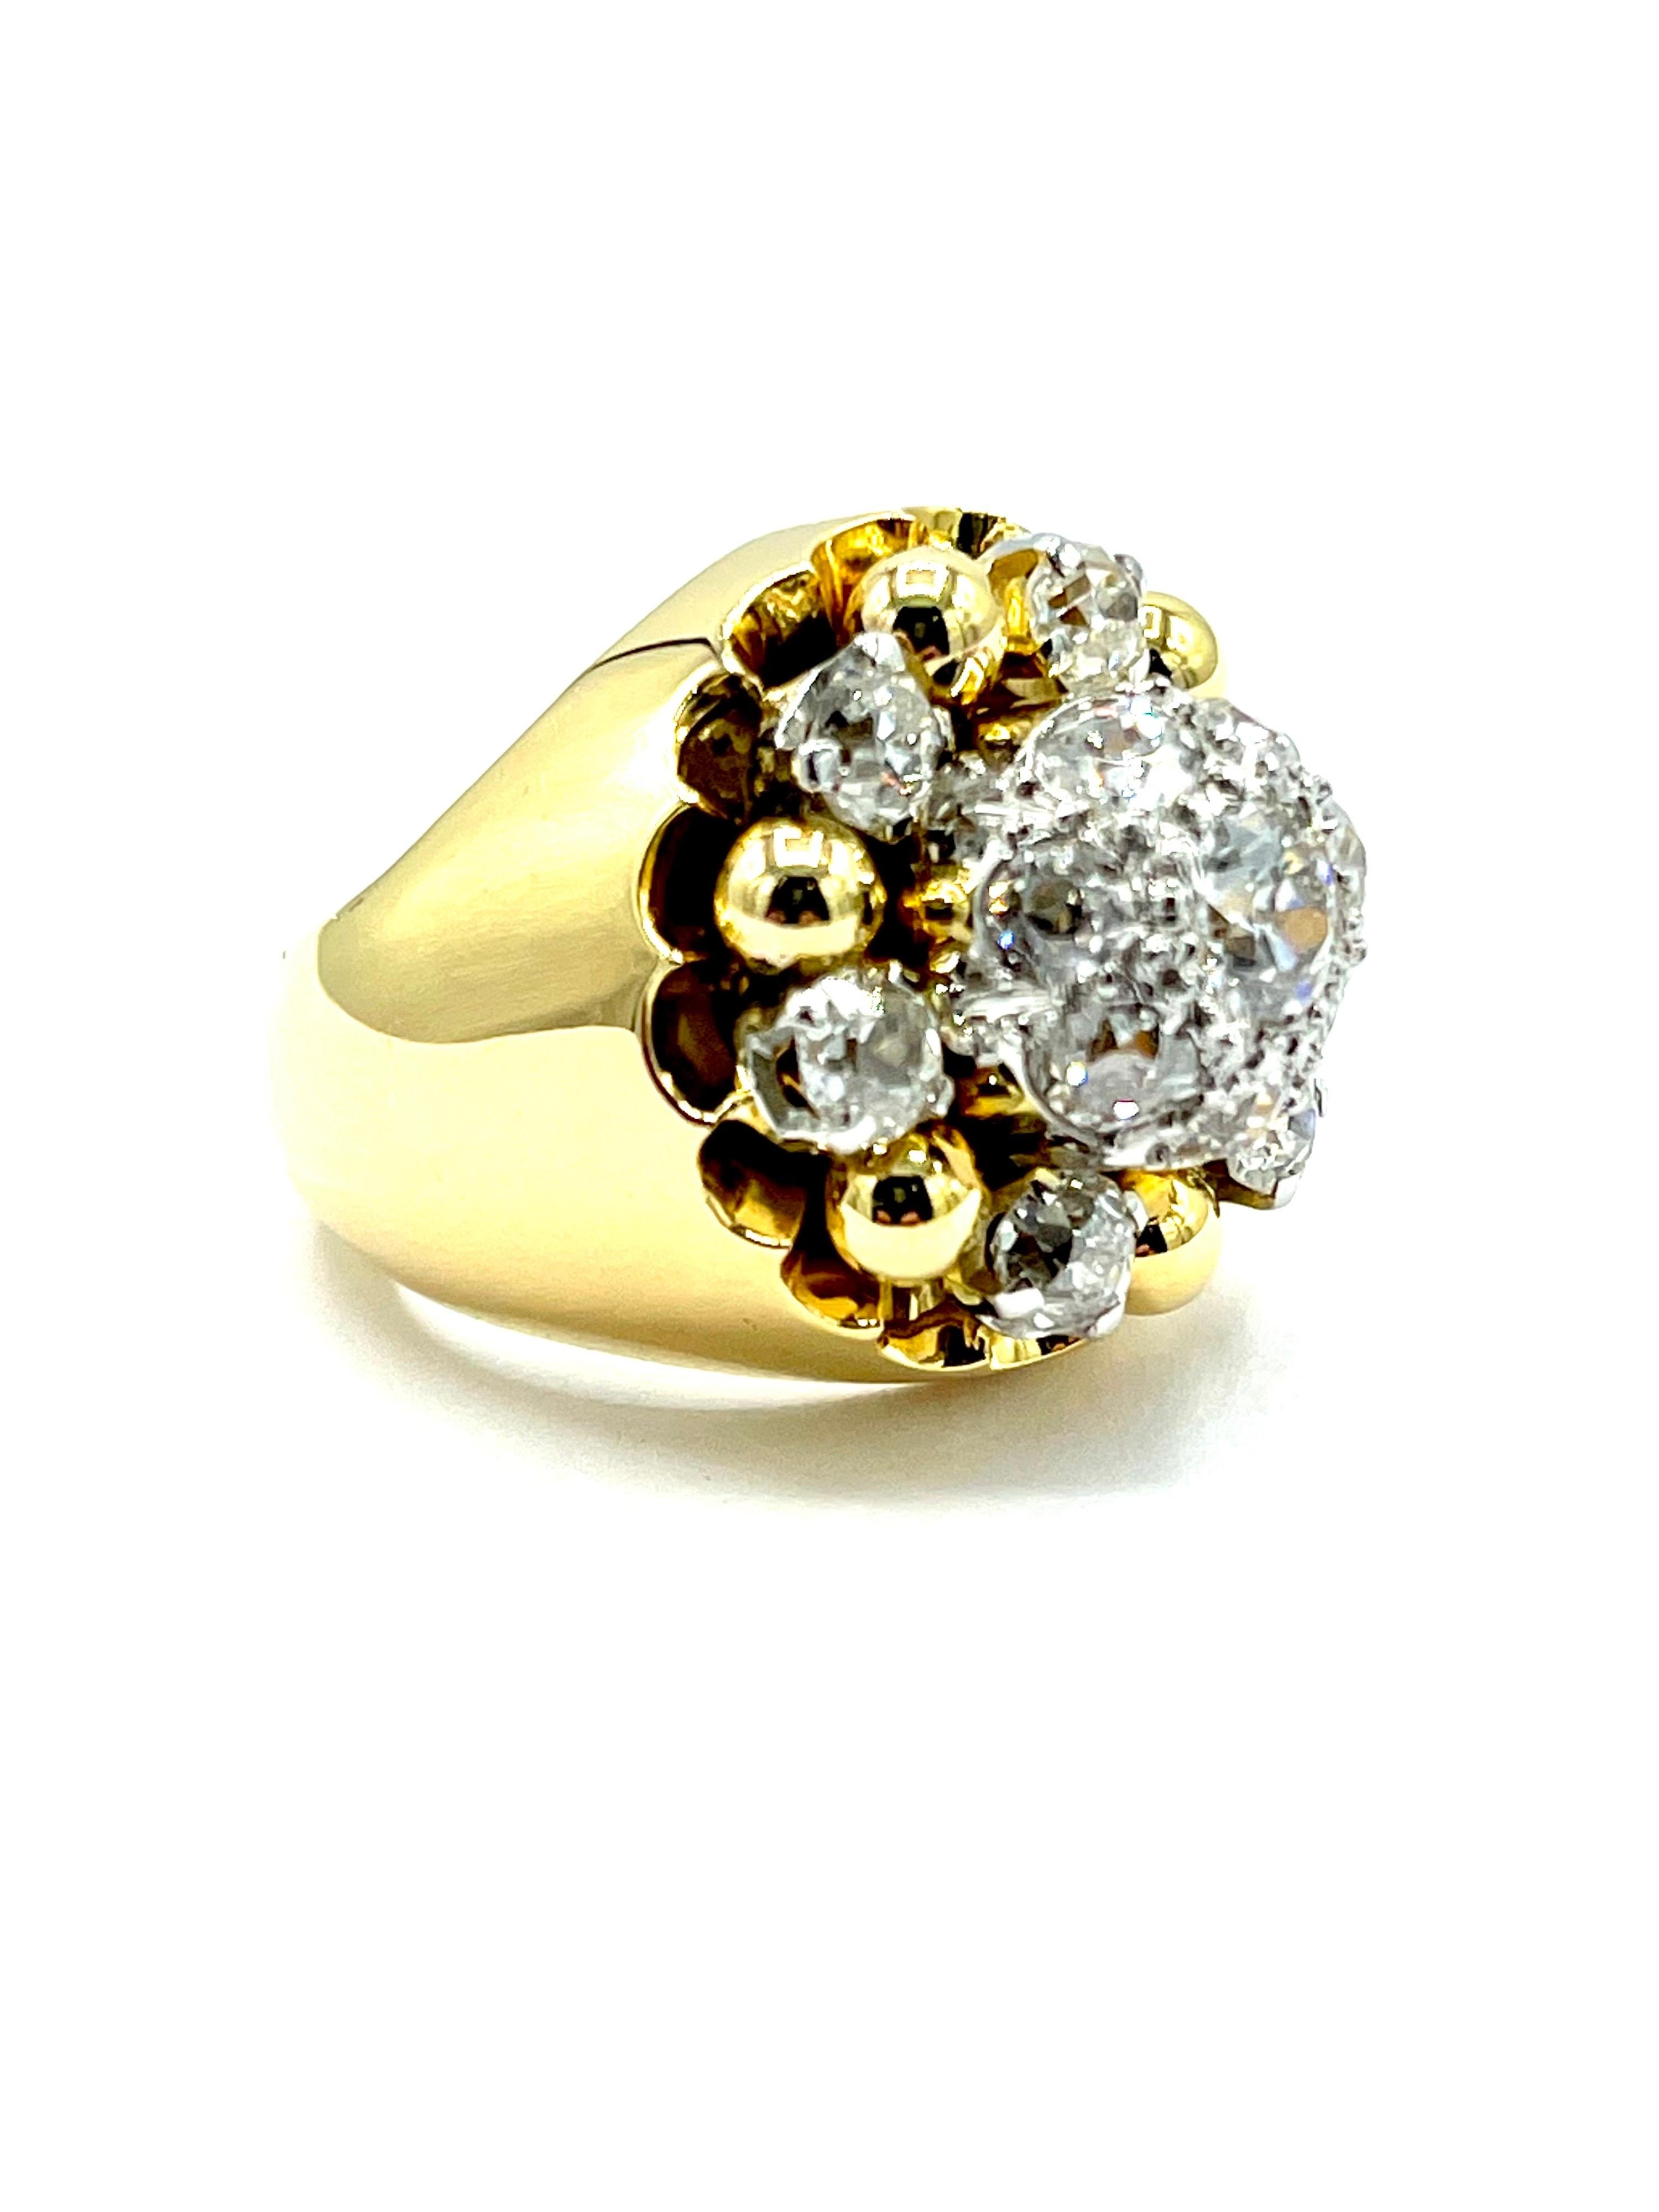 Retro French Made 2.10 Carat Old European Cut Diamond and 18k Yellow Gold Ring For Sale